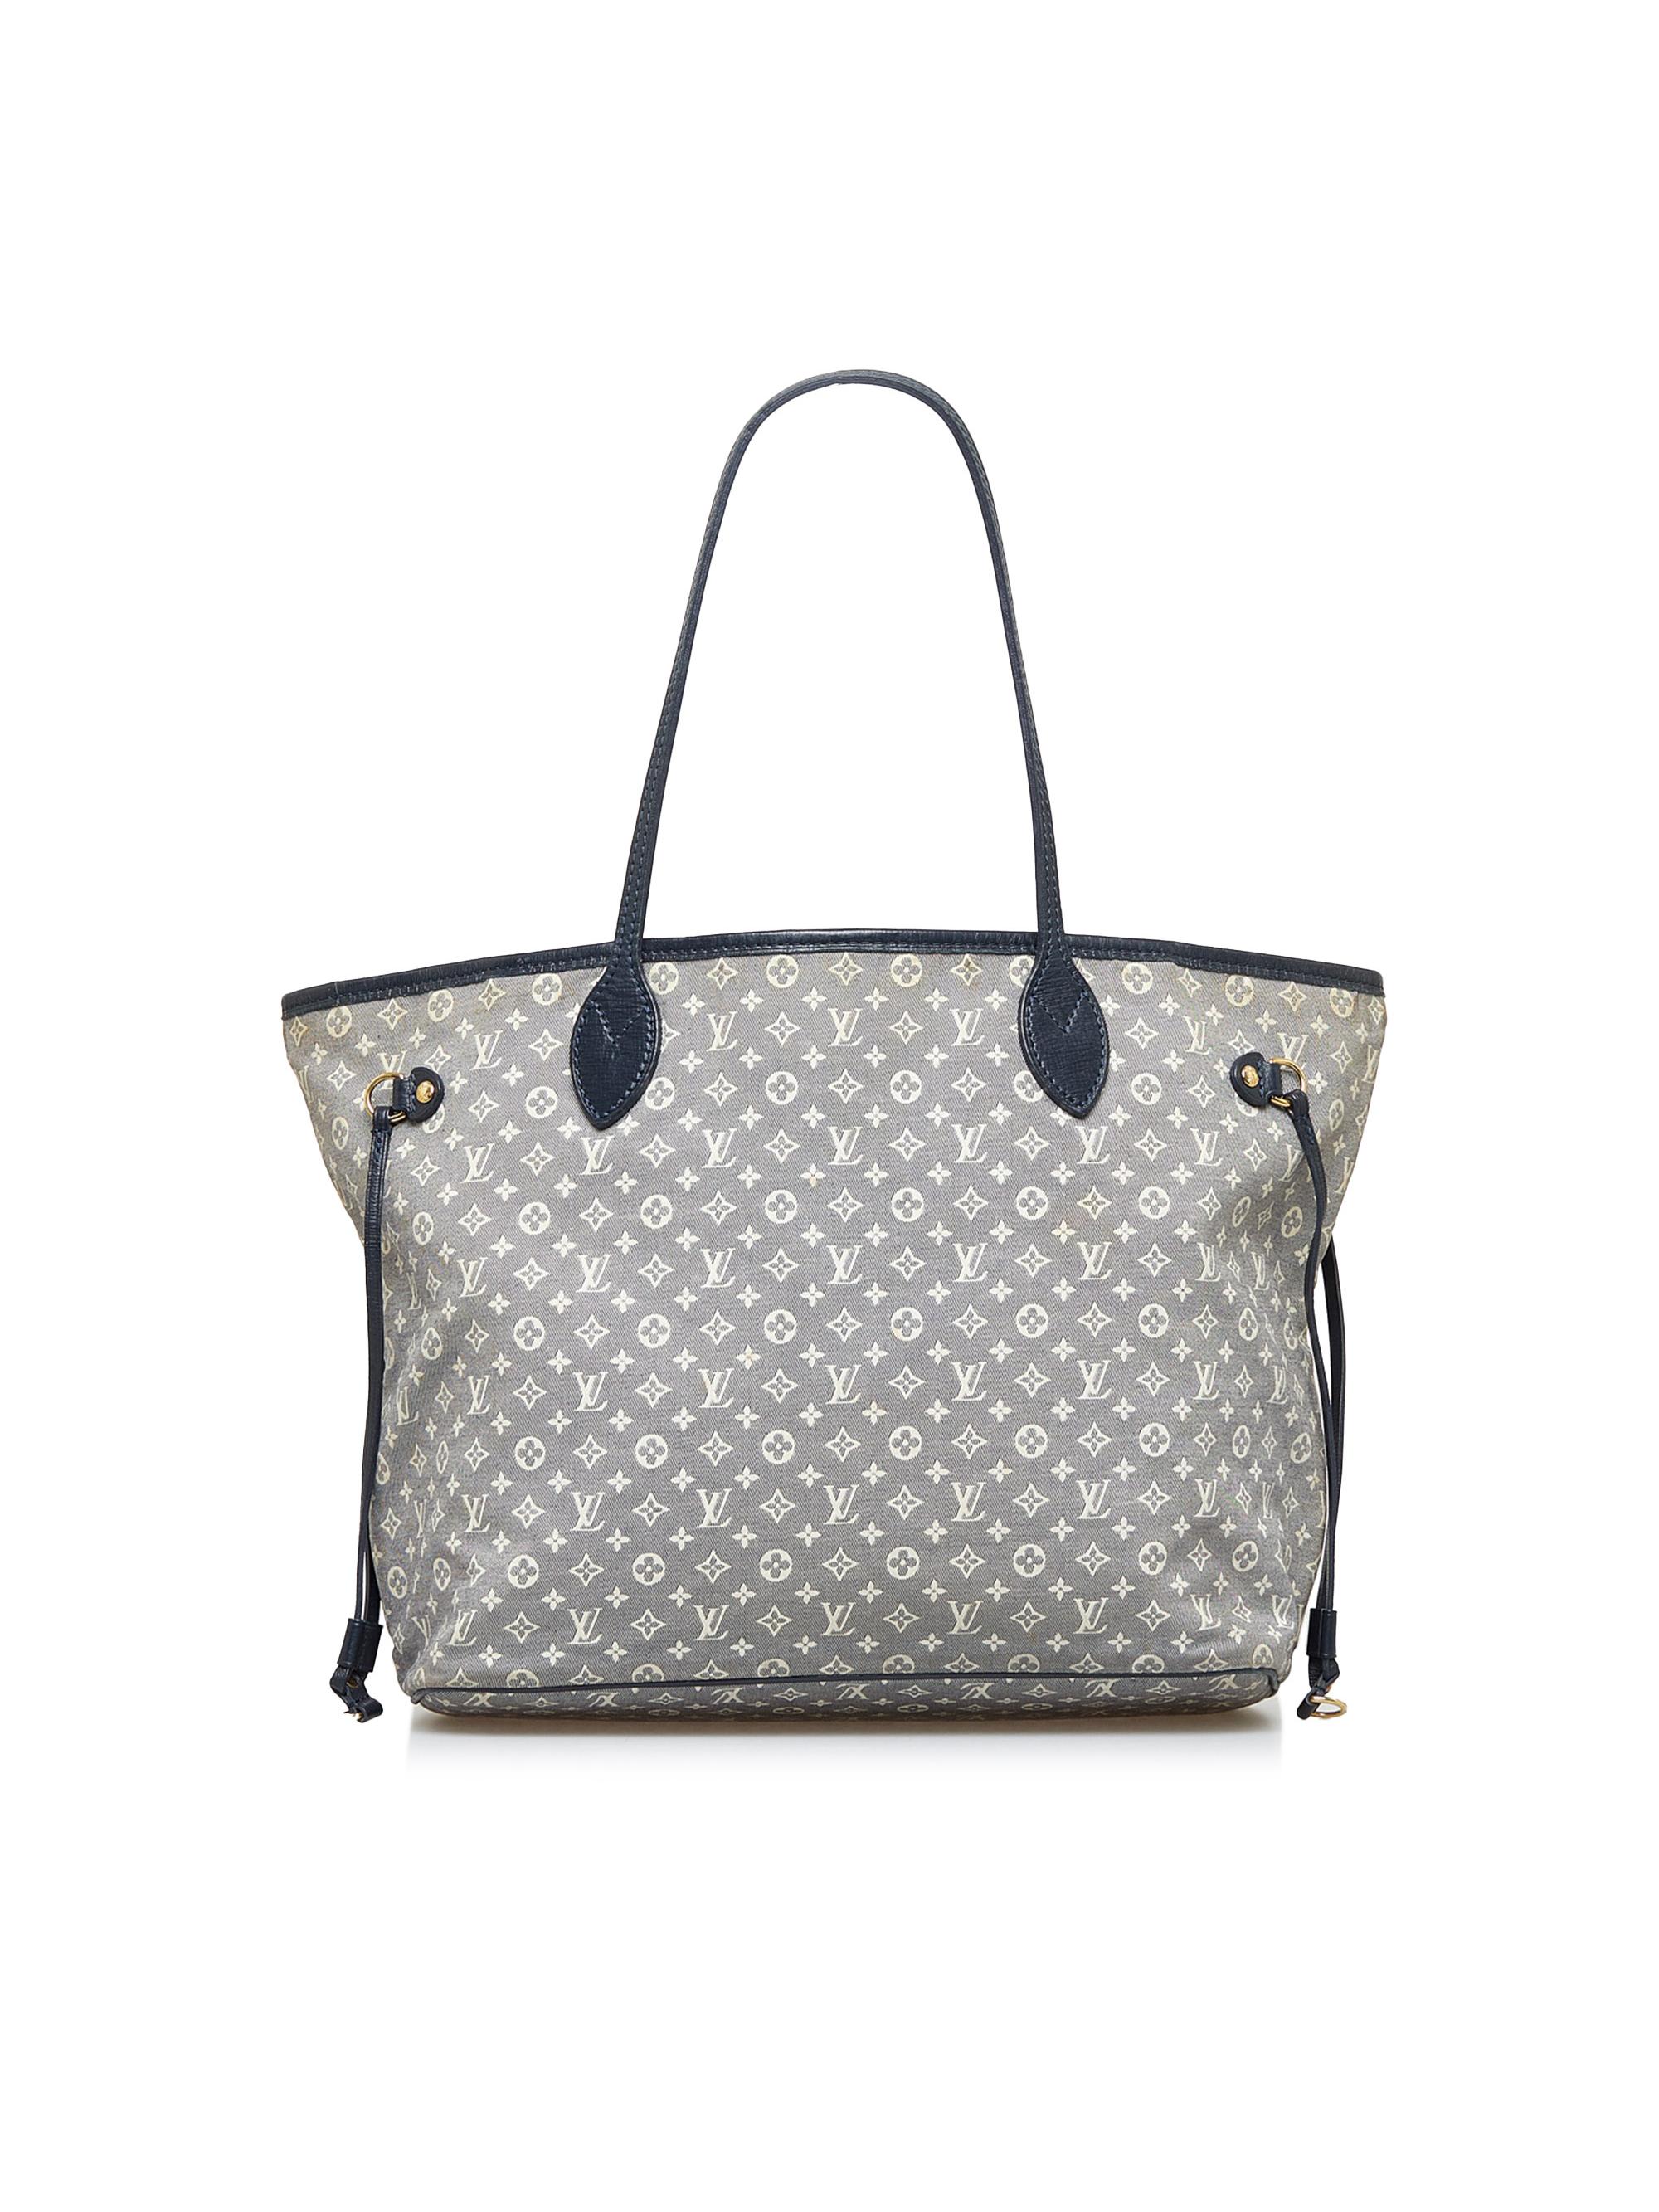 Louis Vuitton Monogram Neverfull MM Used, 43% OFF